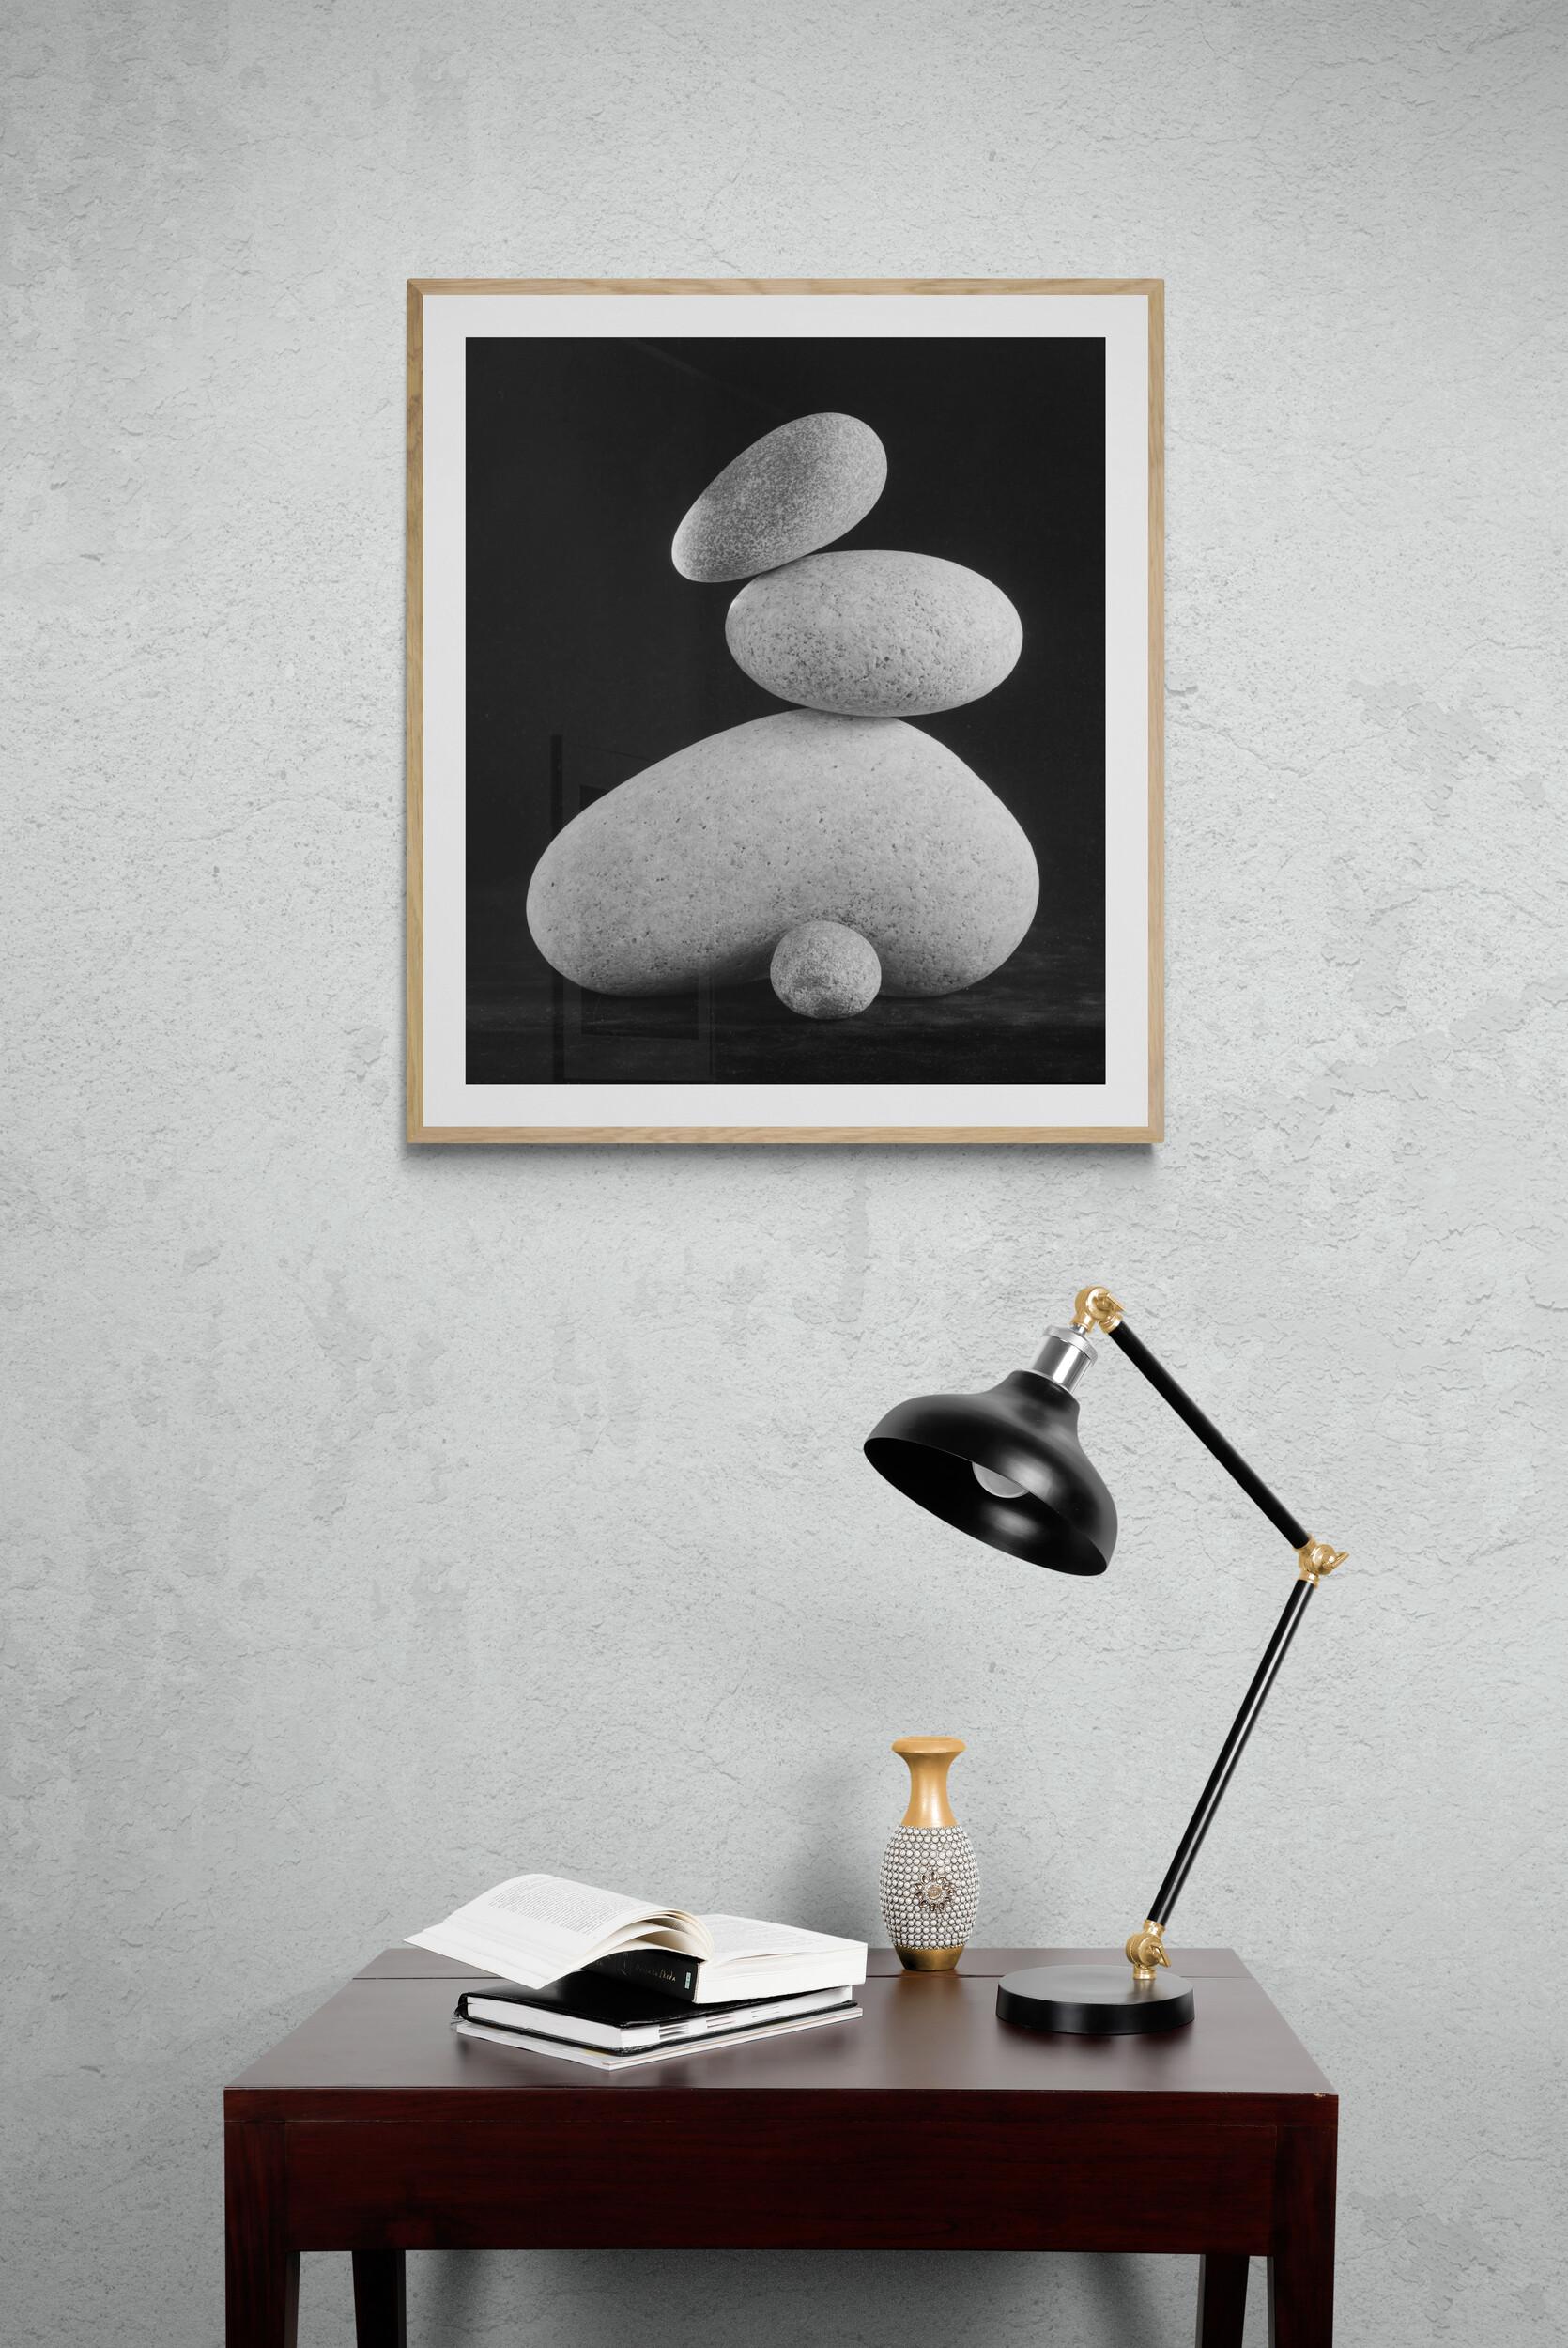 Limited Edition Black and White Still Life Photograph Water Stones #5. This image is Untitled #5 in the Water Stones series.

I have been intrigued by the phenomenon of stacked stones that can increasingly be found in natural areas frequented by